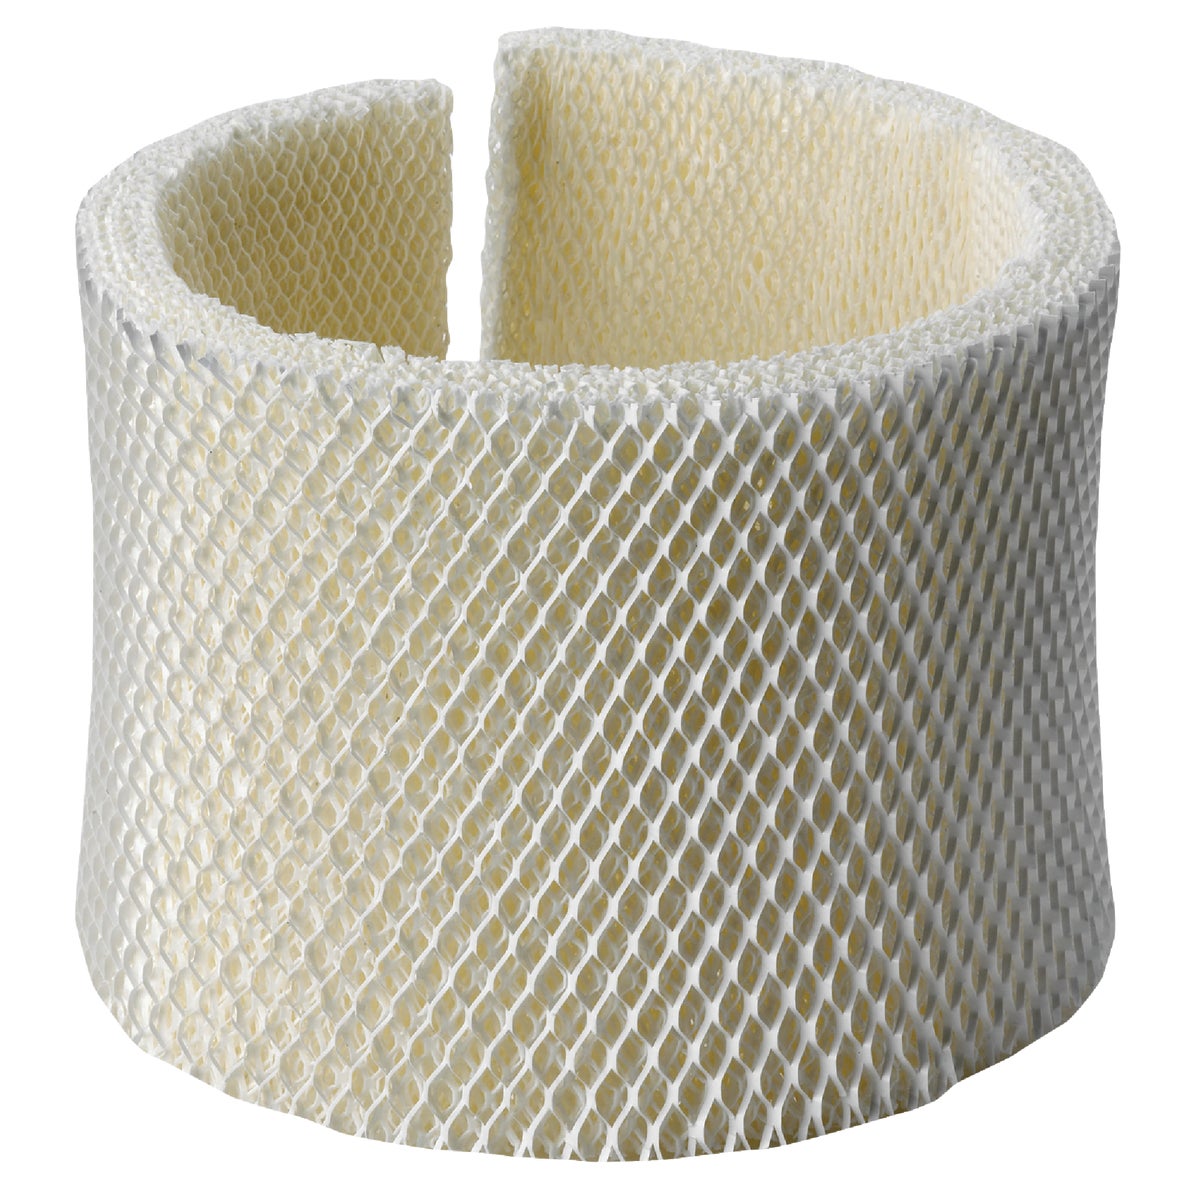 AirCare MAF2 Humidifier Wick Filter